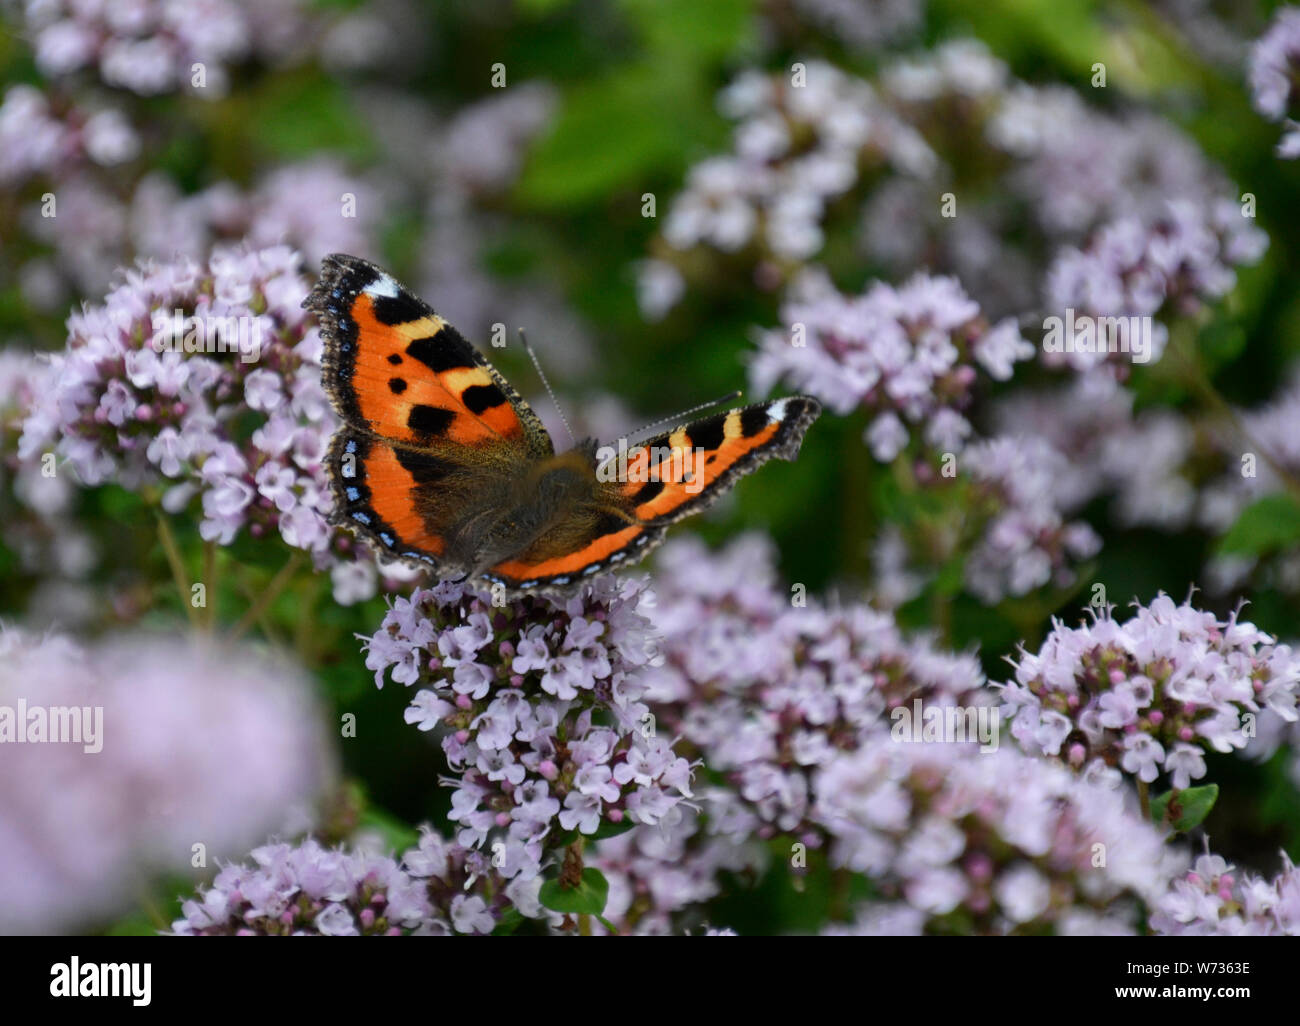 Small tortoiseshell butterfly on small mauve flowers in an English Country Garden, UK Stock Photo